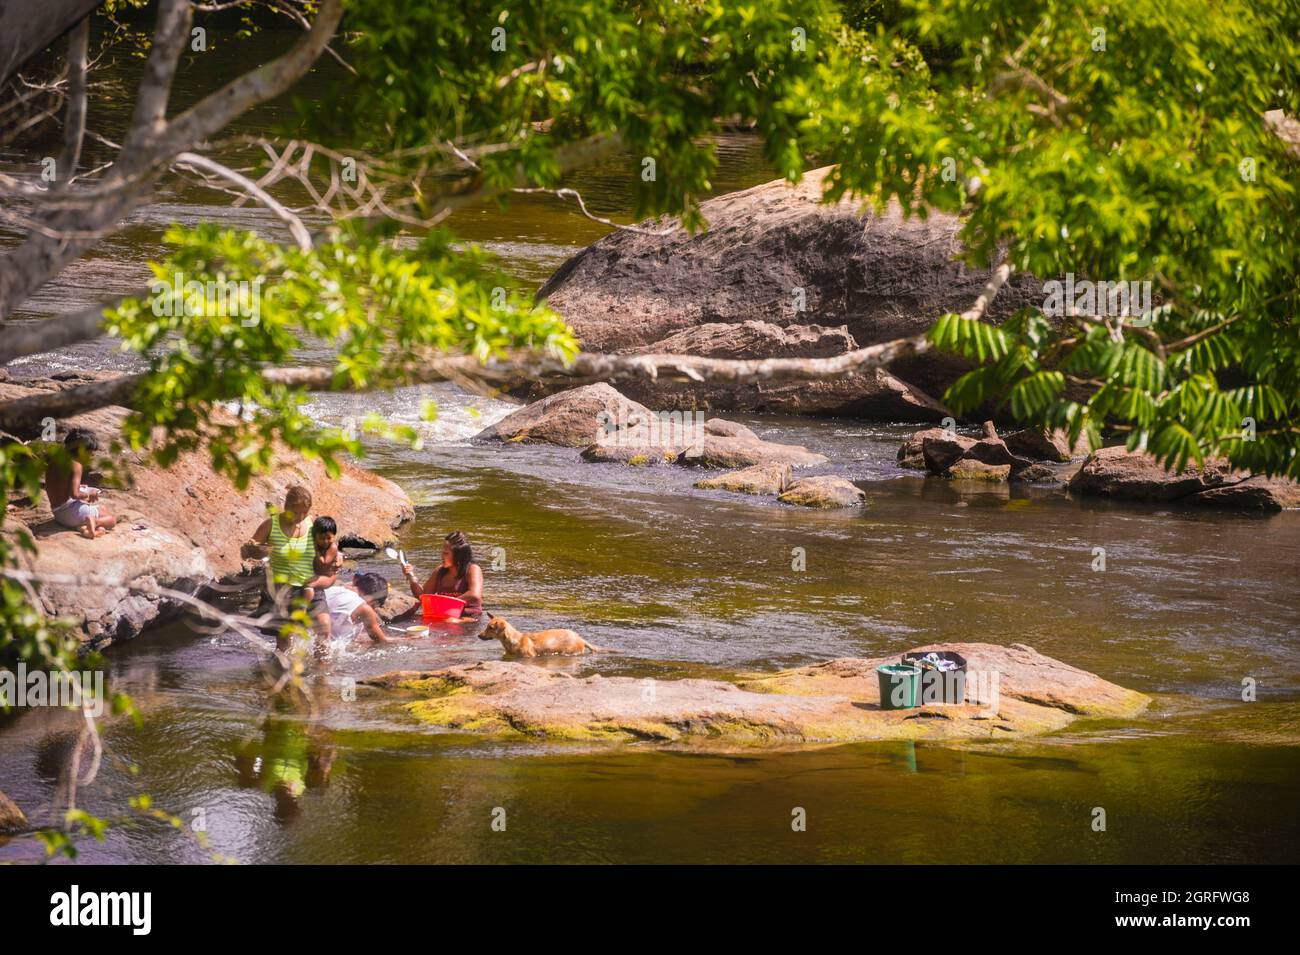 France, French Guiana, Camopi, Parc Amazonien de Guyane, heart zone, scene of life and laundry for an Amerindian family, in the Oyapock river (natural border with Brazil) Stock Photo